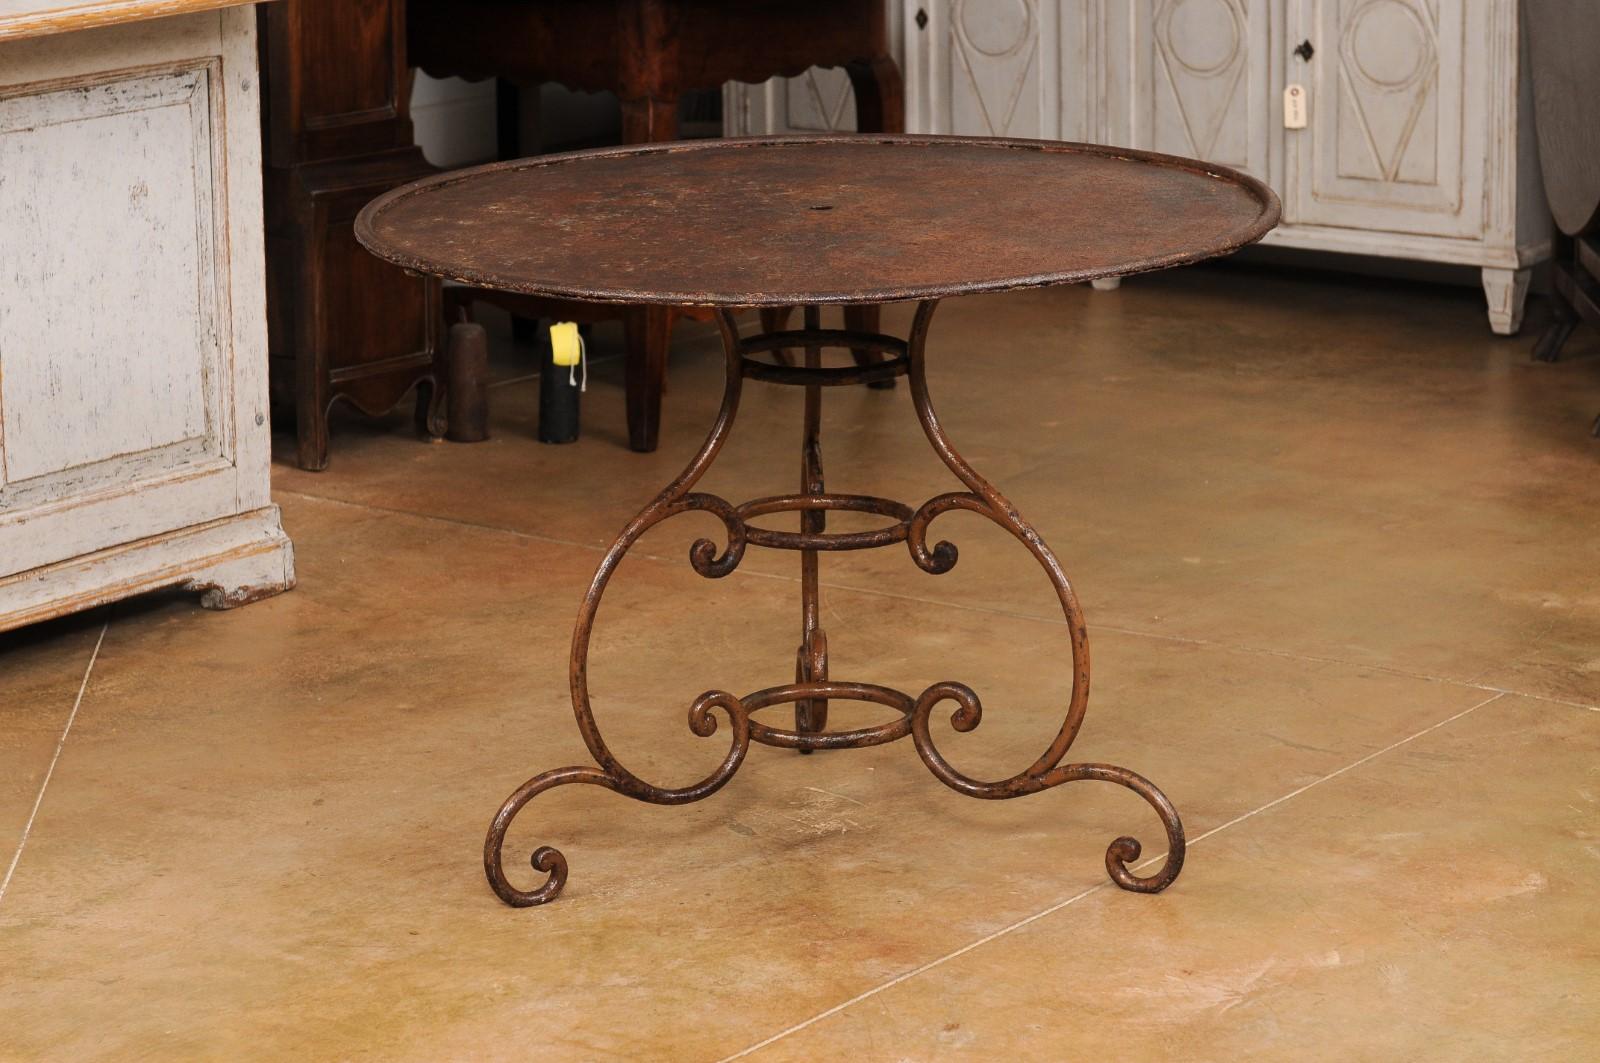 French 19th Century Round Iron Garden Table with Scrolling Base and Rusty Finish For Sale 7